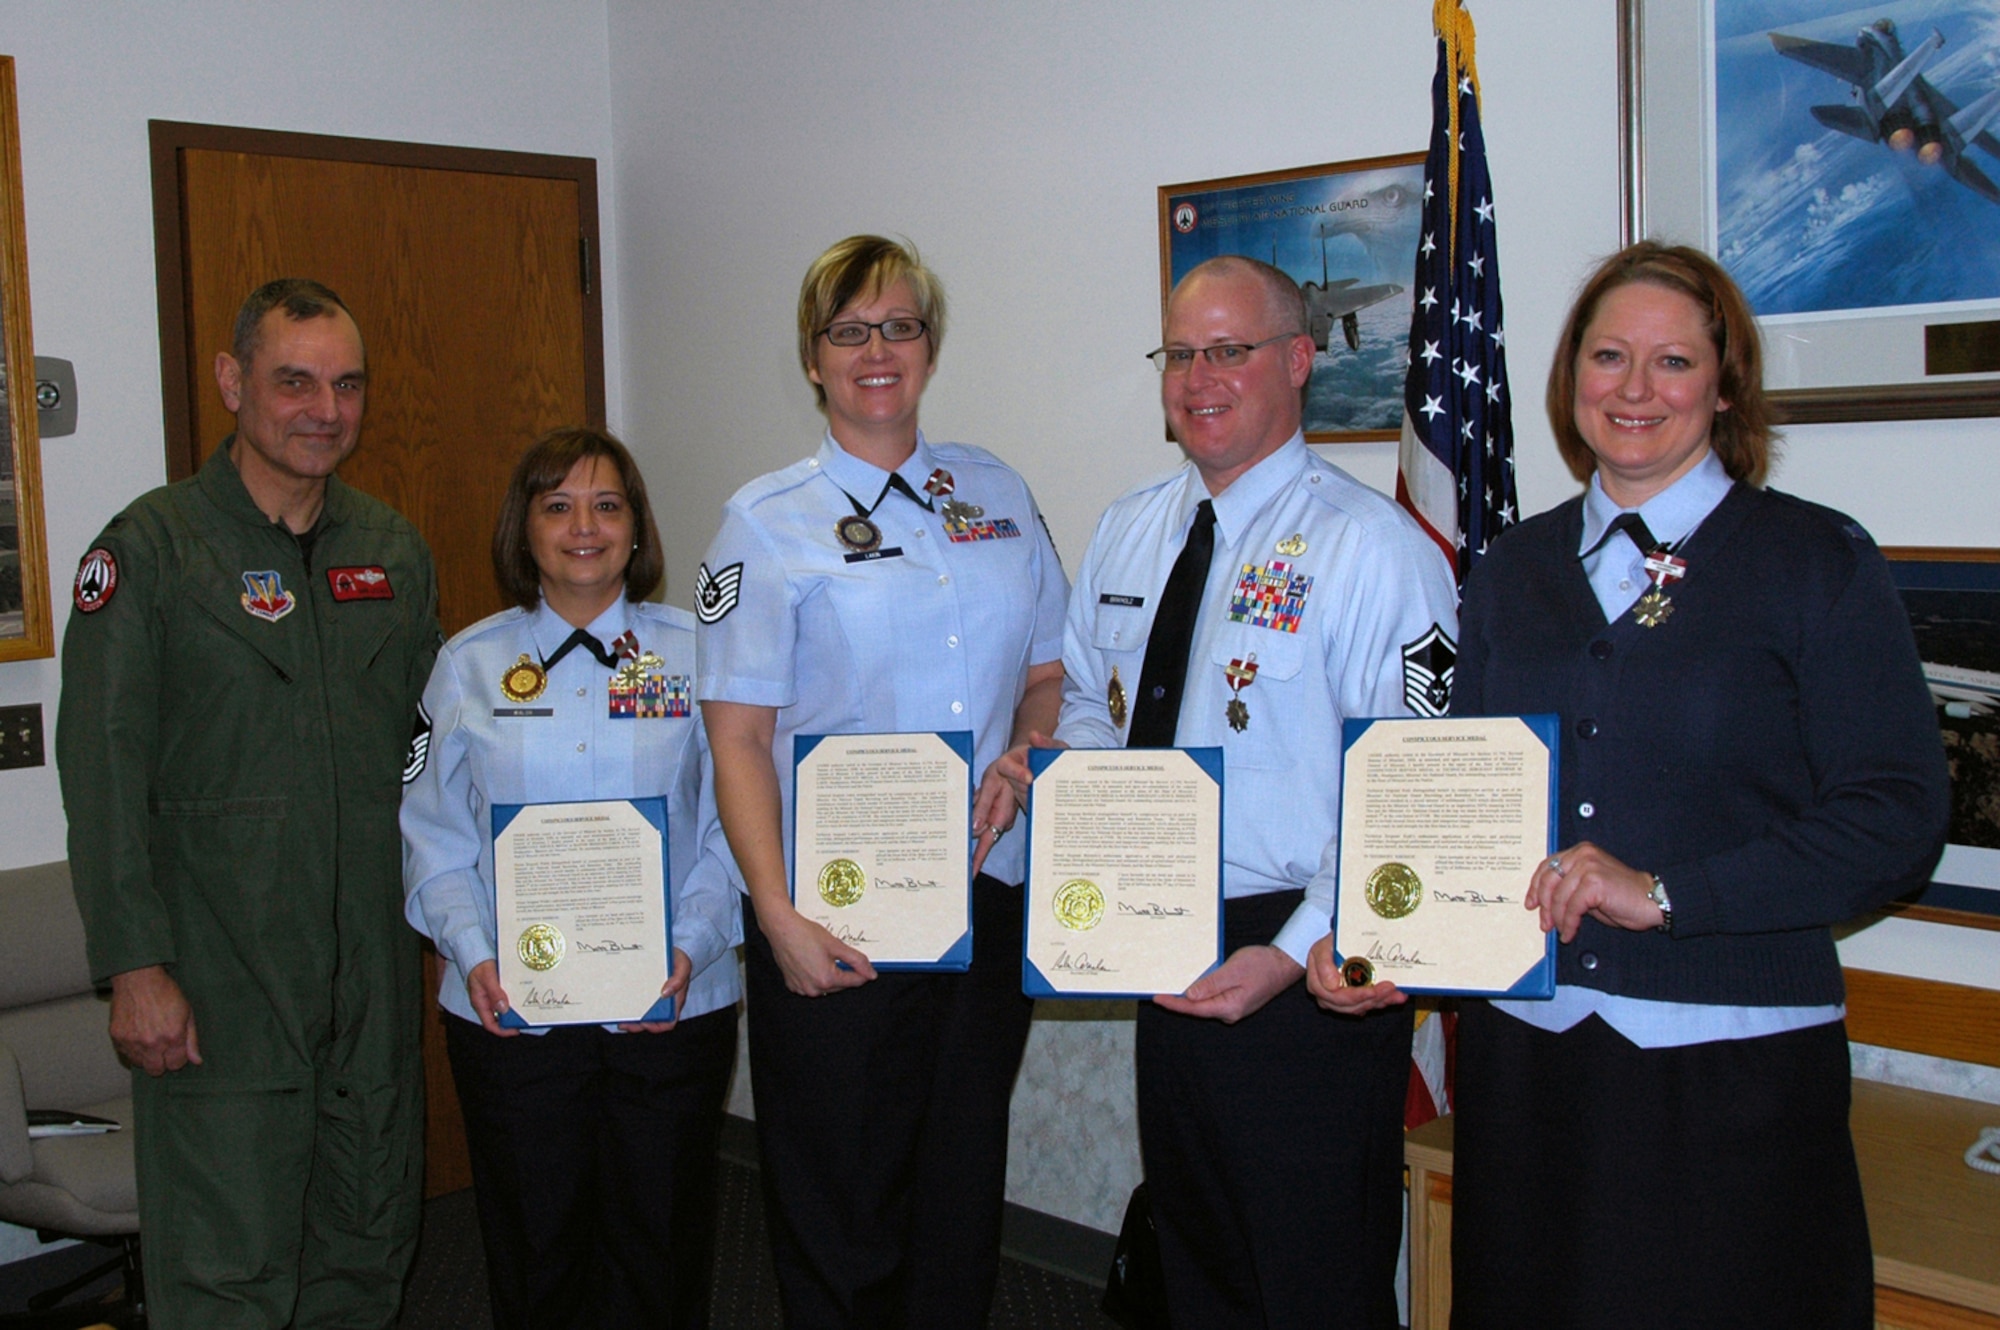 Col. Robert L. Leeker, 131st Bomb Wing commander, stands with Master Sgt. Carol Walsh, 131st Director of Personnel Military Retention office manager, Technical Sgt. Melissa Lakin, 131st Director of Personnel Military Recruiting recruiter, Master Sgt. Louis Birkholz, 131st DPMR recruiting office manager, and Technical Sgt. Jennifer Kuhl, 131st DPMR officer recruiter.  The recruiting and retention office at Lambert received a Conspicuous Service Medal as part of the Missouri Air National Guard Recruiting and Retention Team for their outstanding contributions resulting in a record number of new recruits. Not shown Master Sgt. Bernie Botson, 131st DPMH production recruiter.  (Photo by Master Sgt. Mary-Dale Amison)